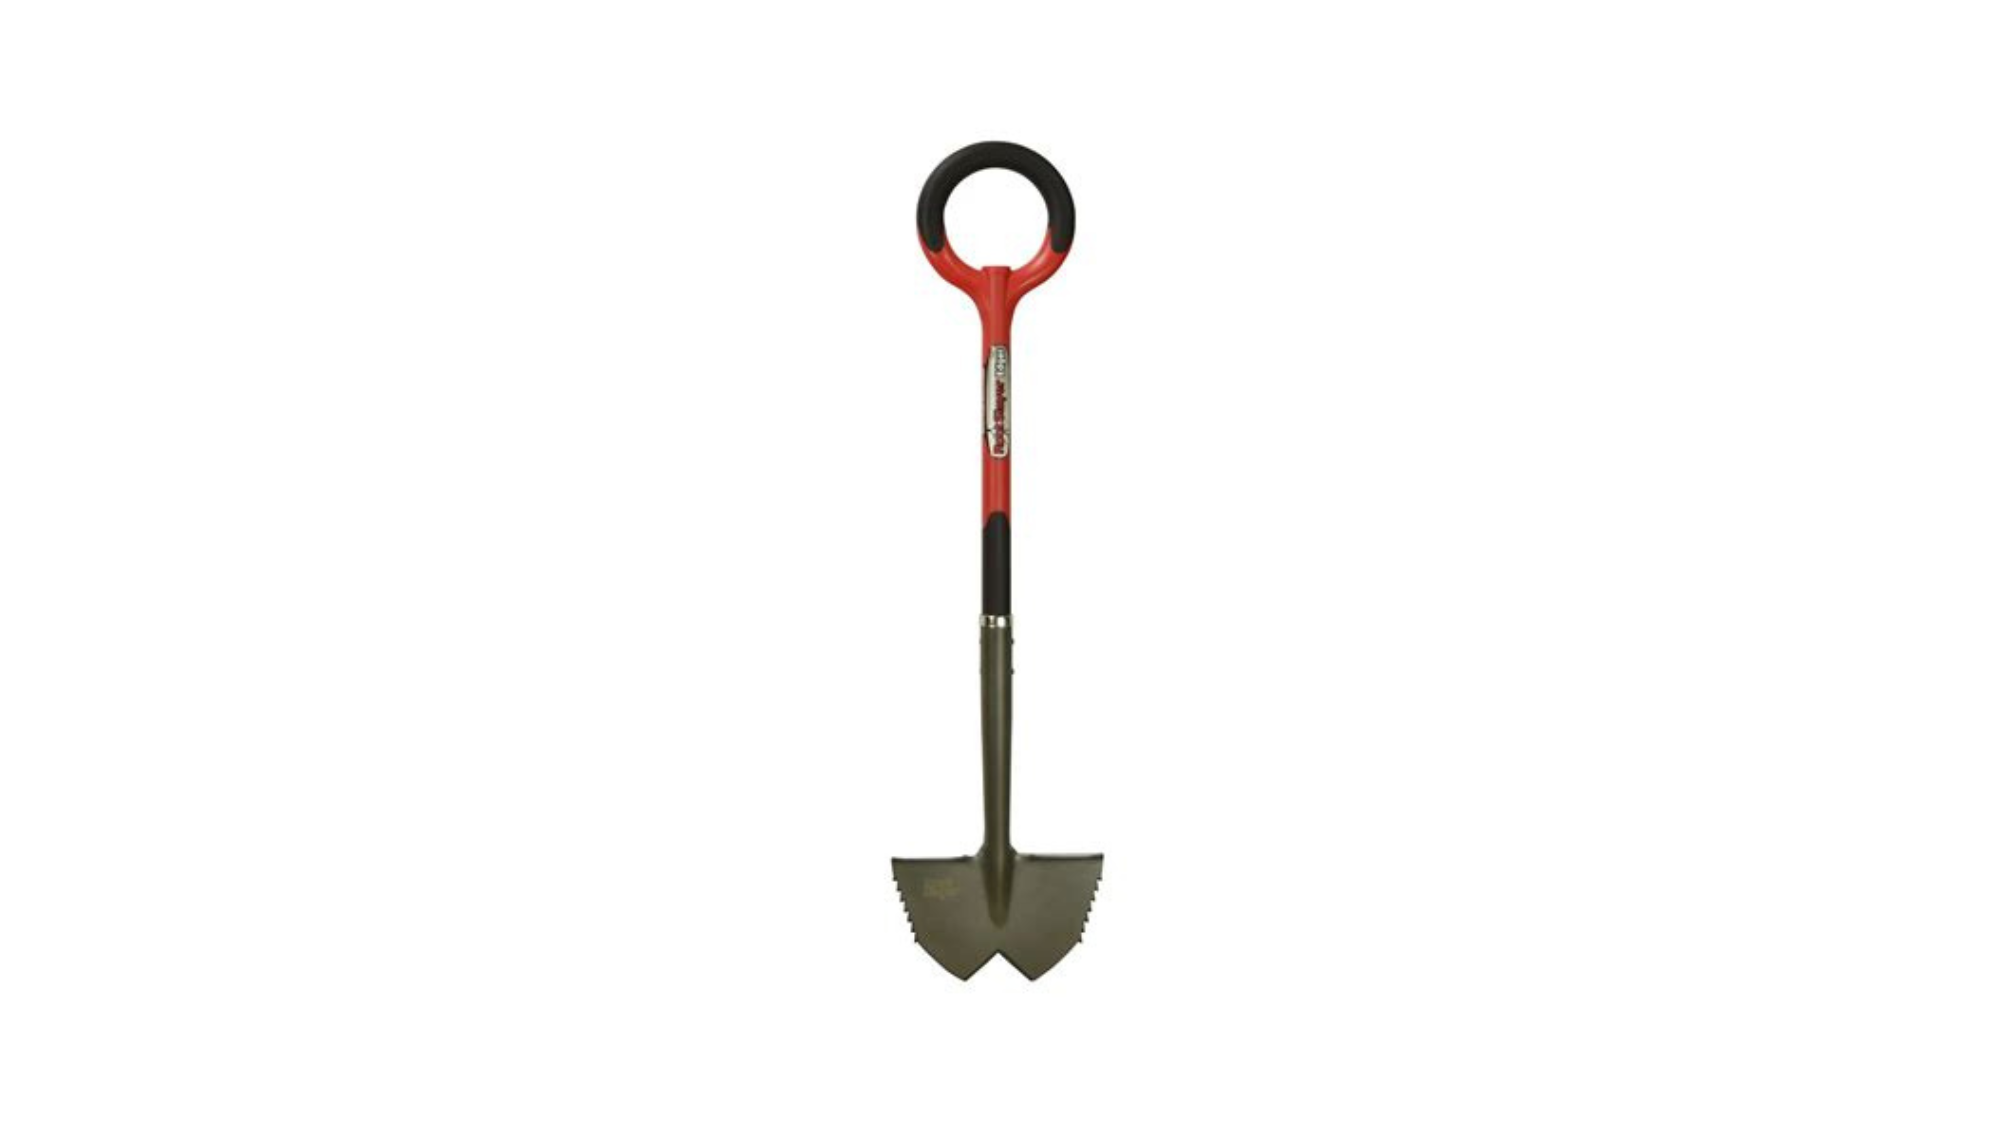 Radius Root Slayer garden manual edger with O-shape handle and inverted V-tip blade on white background